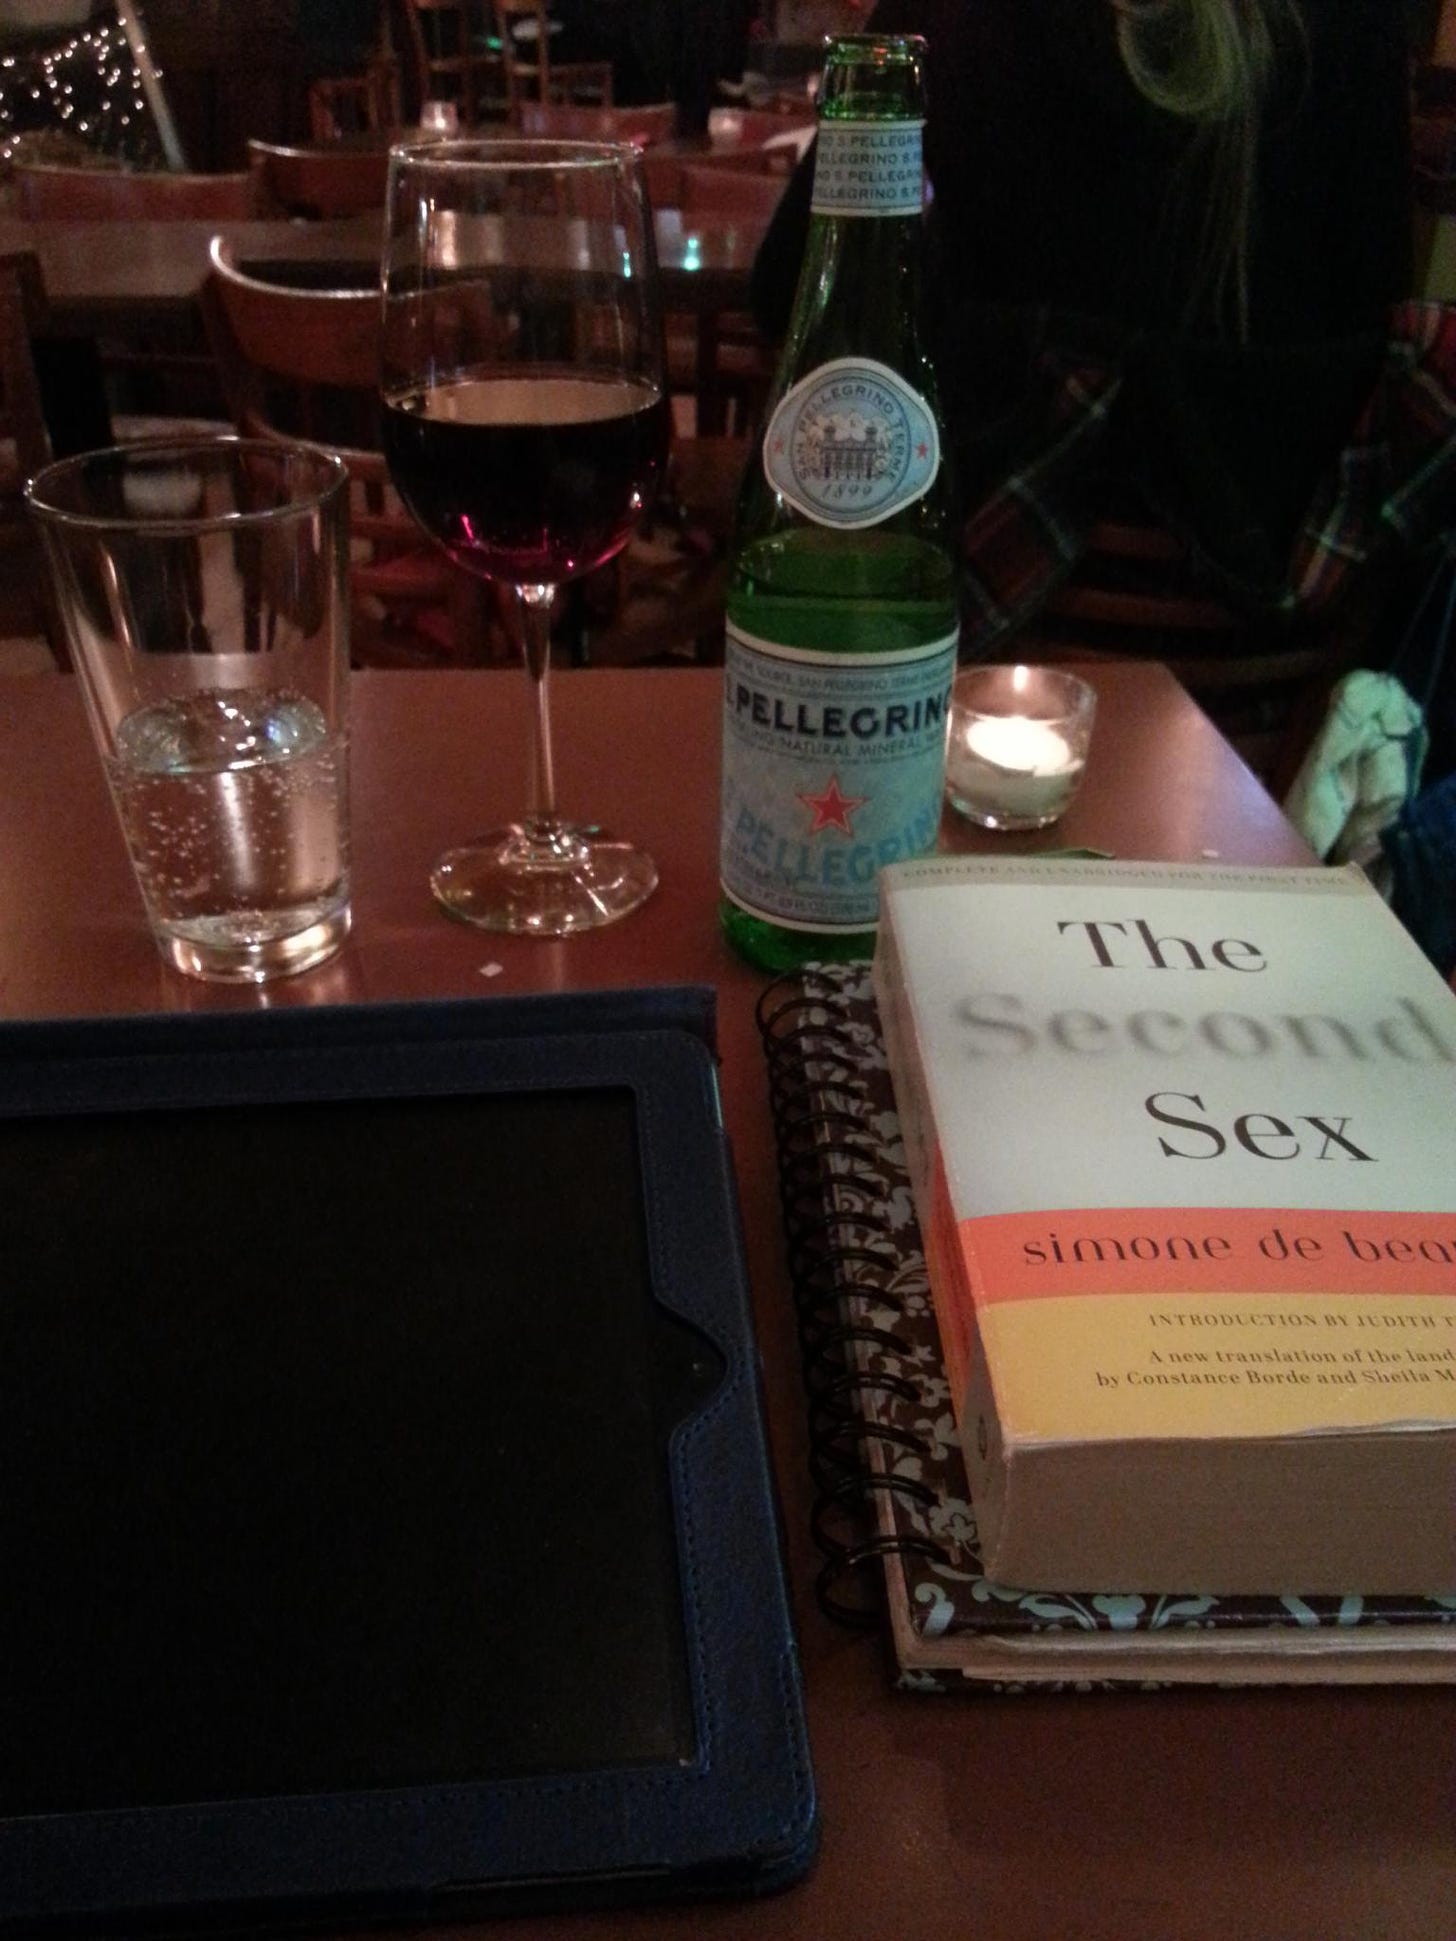 a table in a caffe with glasses of water and wine, a san pellegrino bottle, and a copy of 'the second sex' by simone de beauvoir